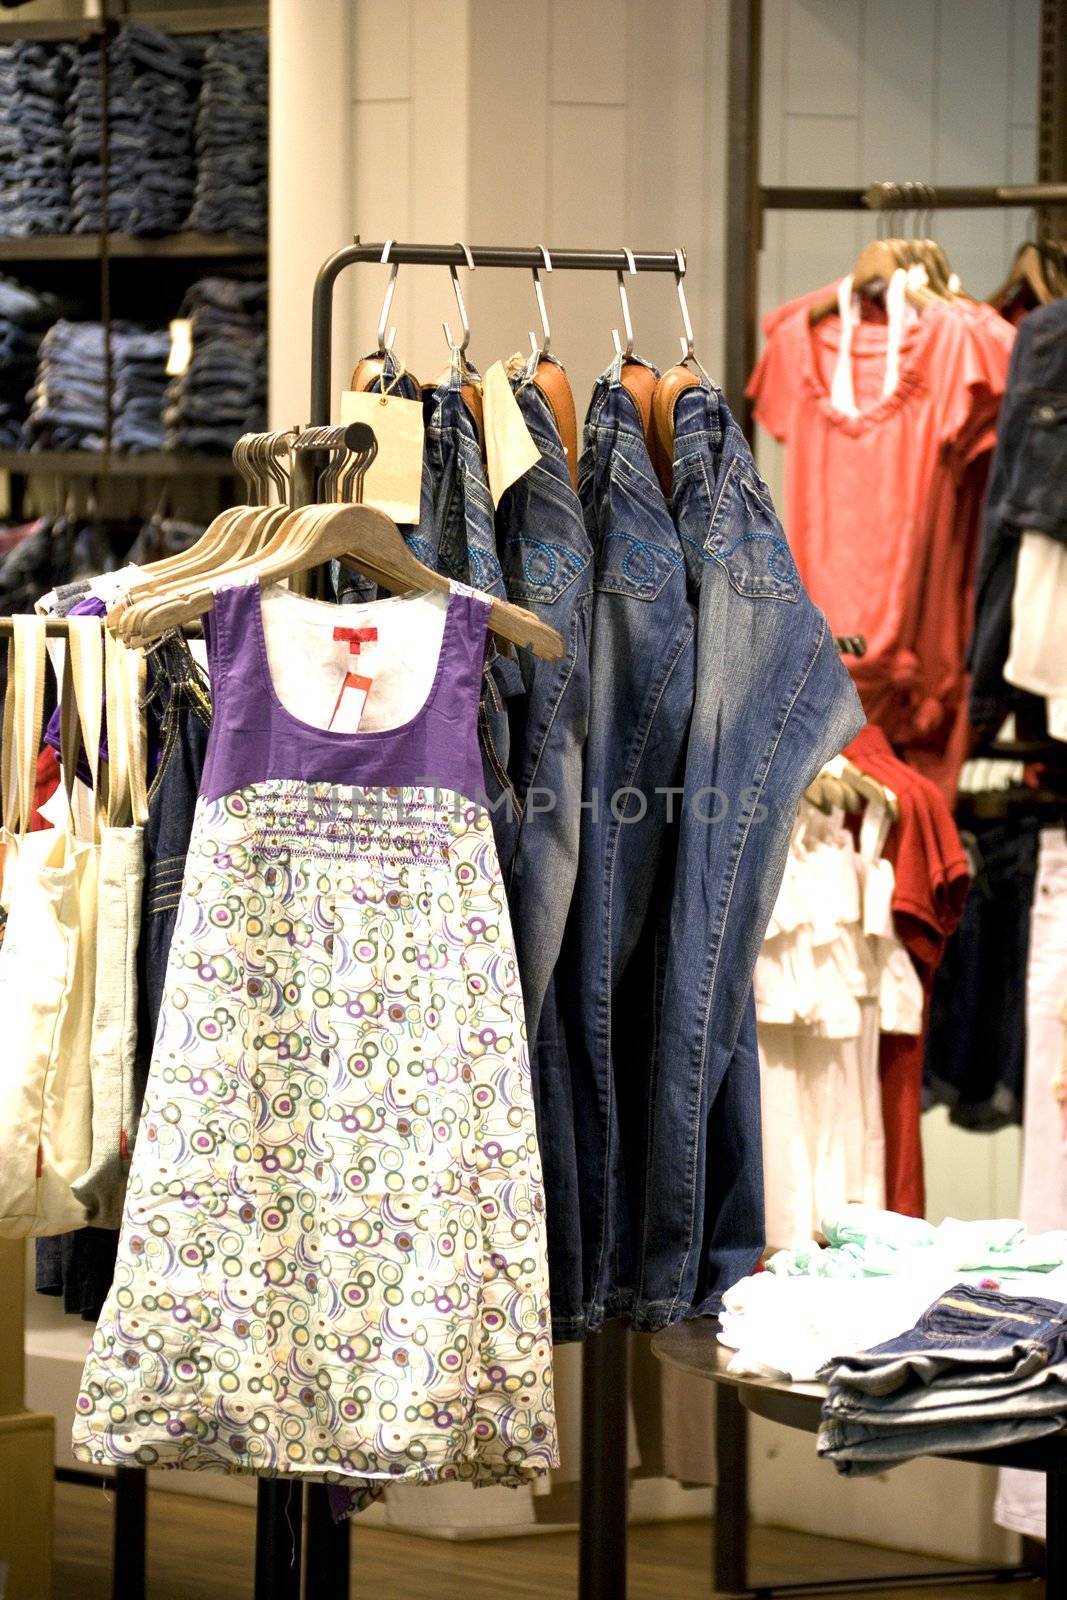 Image of a shop selling clothes in Malaysia.